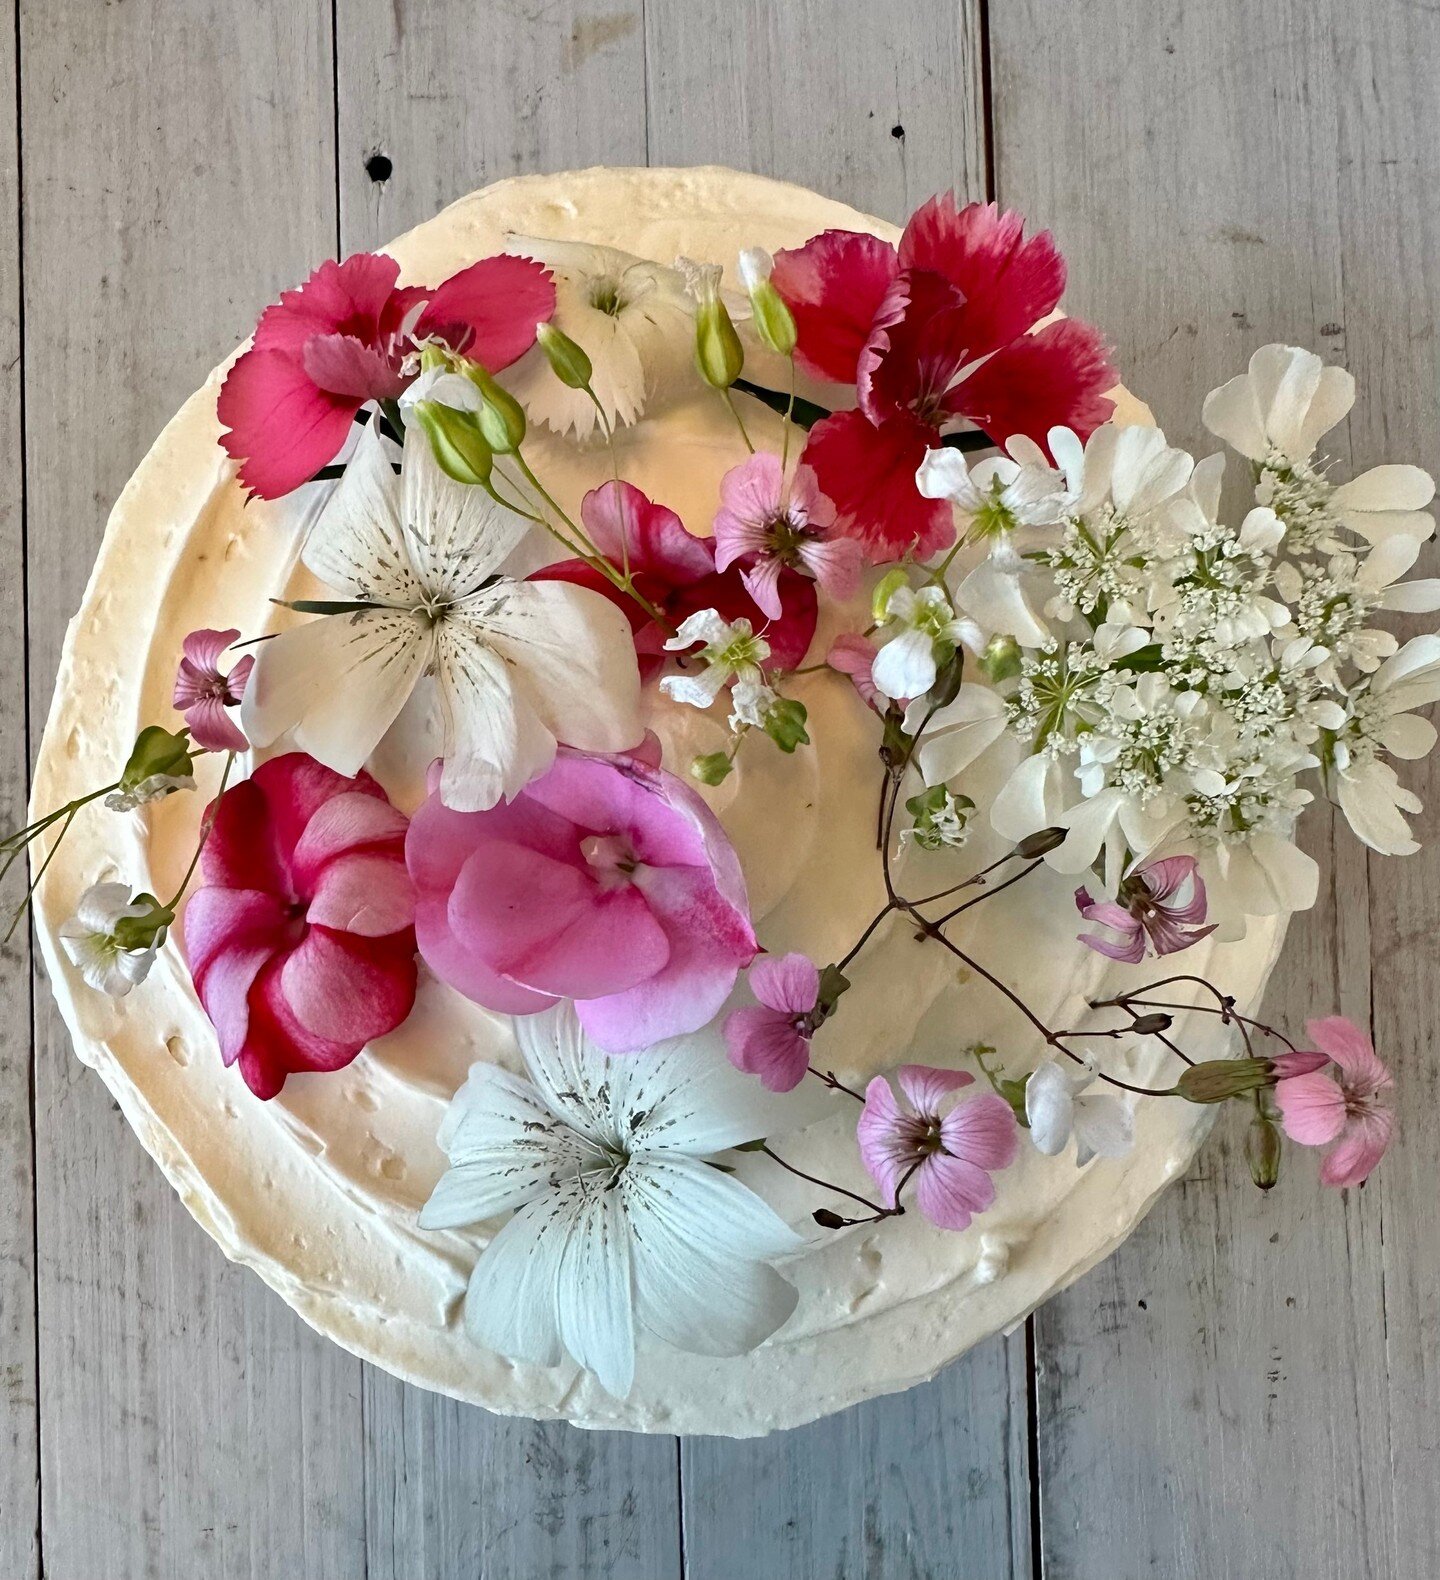 Shop cake, cookies, and Mother's Day Baskets from Star Provisions. Order online at the link in our bio! 

Pictured: 6&rdquo; white cake, vanilla buttercream, local flowers, Summerland Farm strawberry preserves